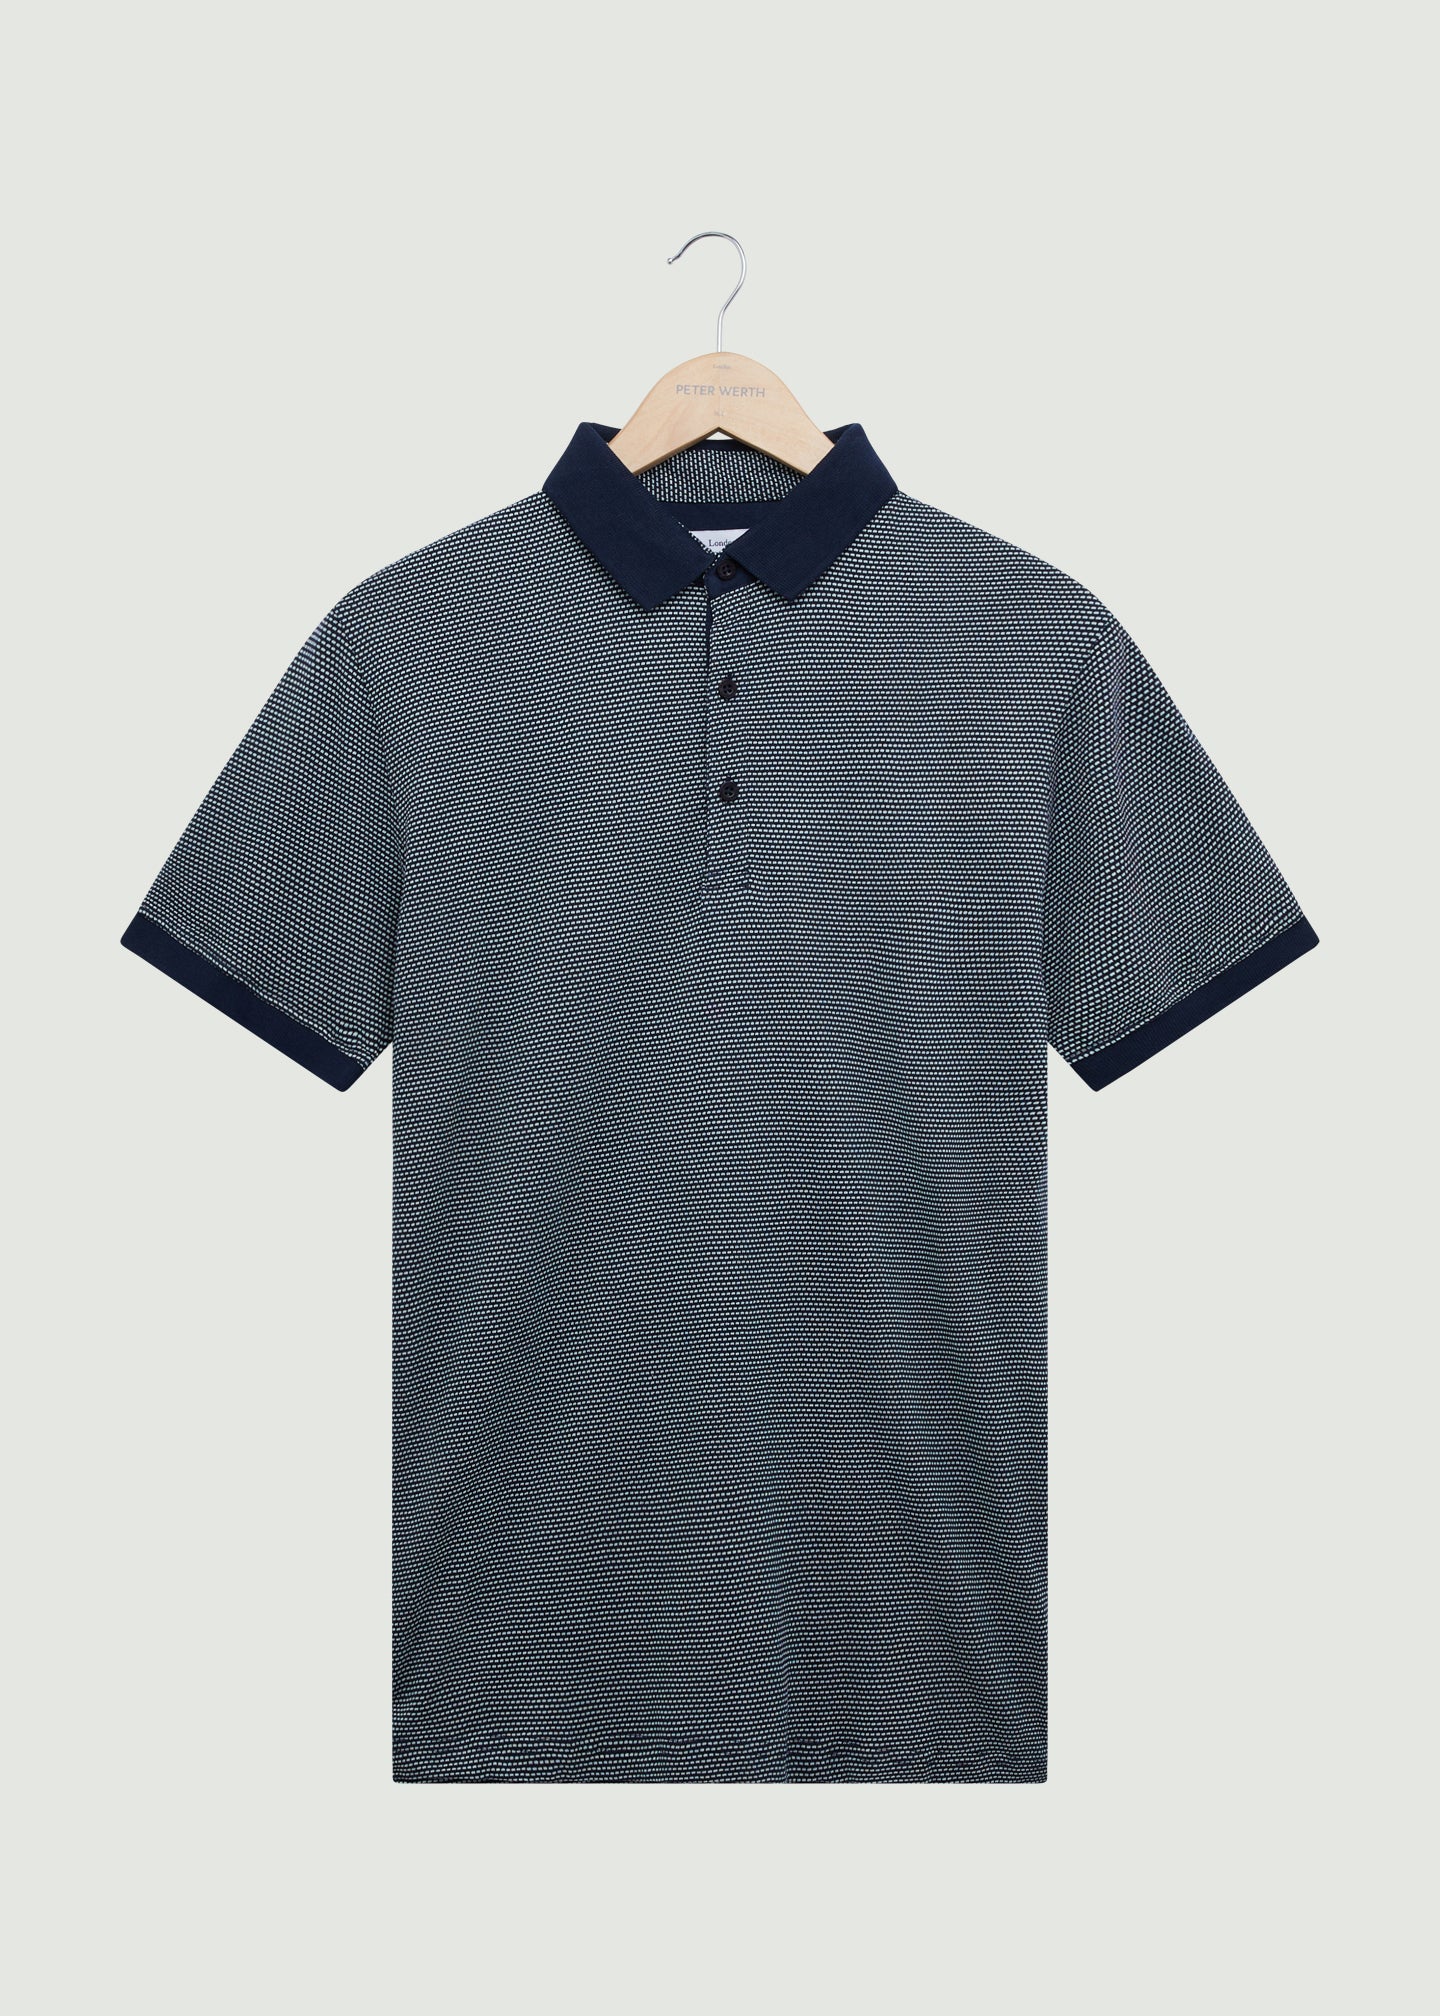 Peter Werth Sarsfield Polo